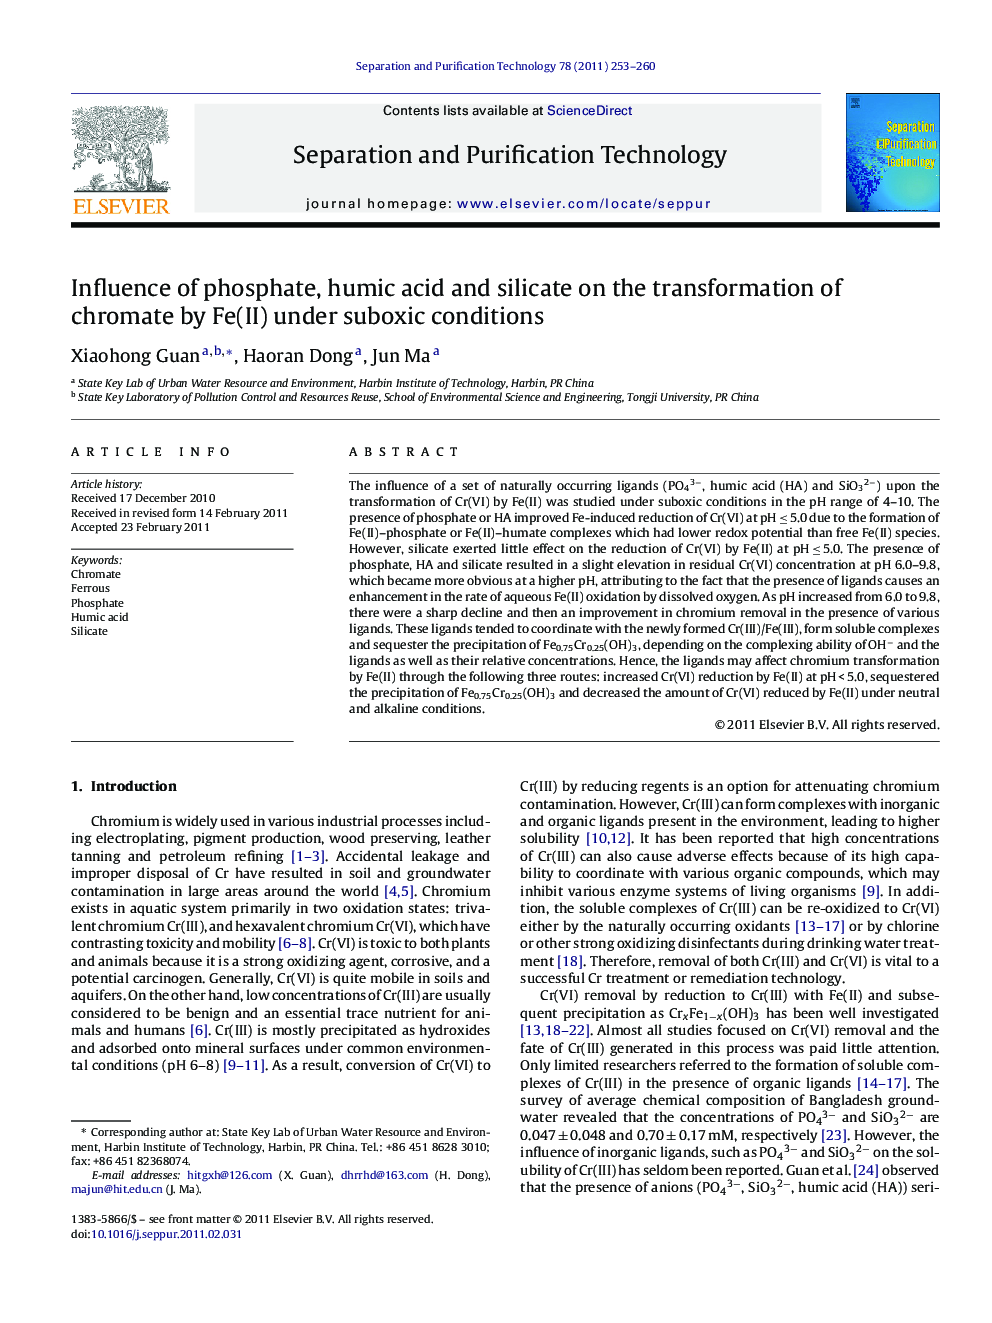 Influence of phosphate, humic acid and silicate on the transformation of chromate by Fe(II) under suboxic conditions